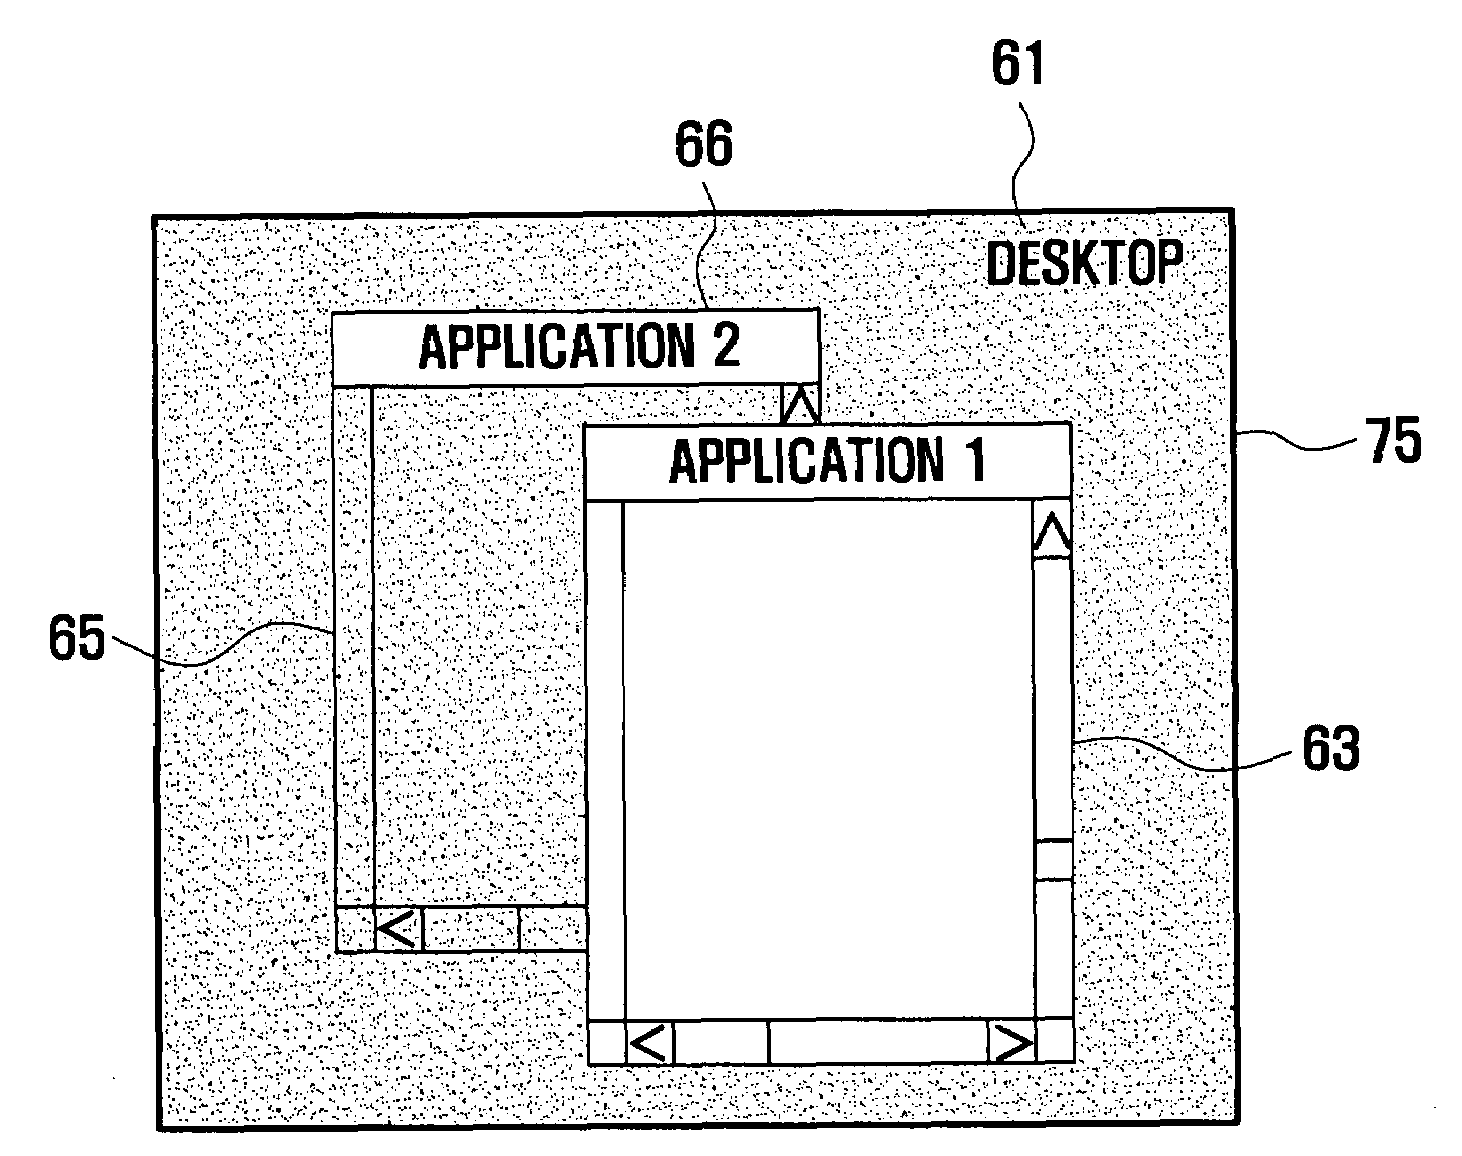 Method and system for displaying application windows for computer system using video data modulation